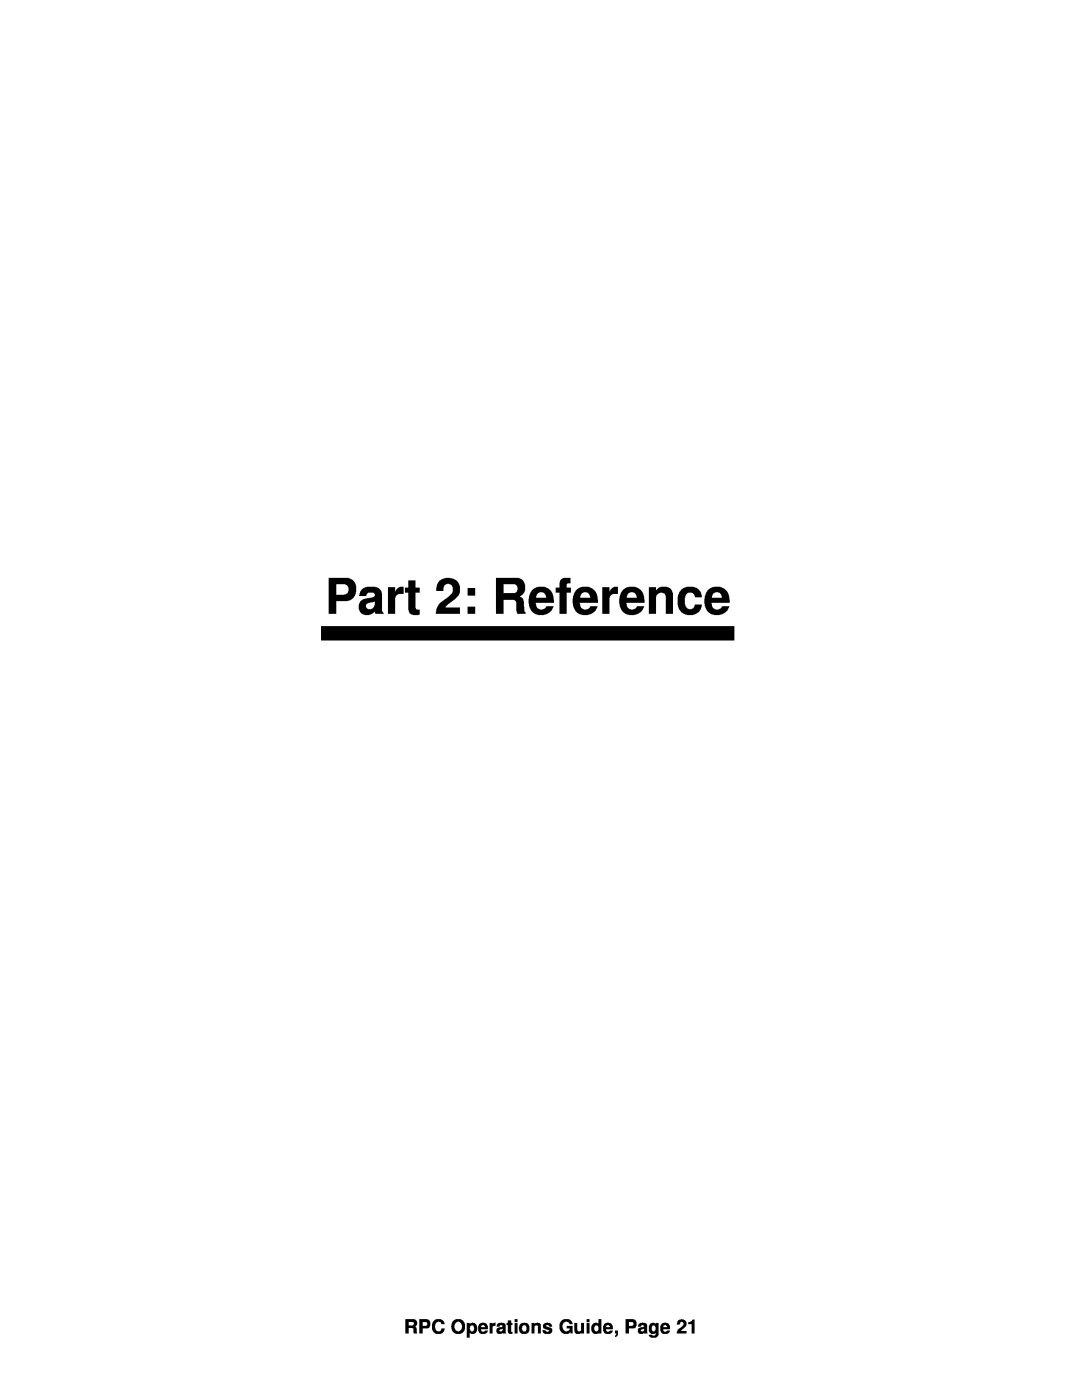 ARRI ARRI Ramp Preview Controller manual Part 2 Reference, RPC Operations Guide, Page 